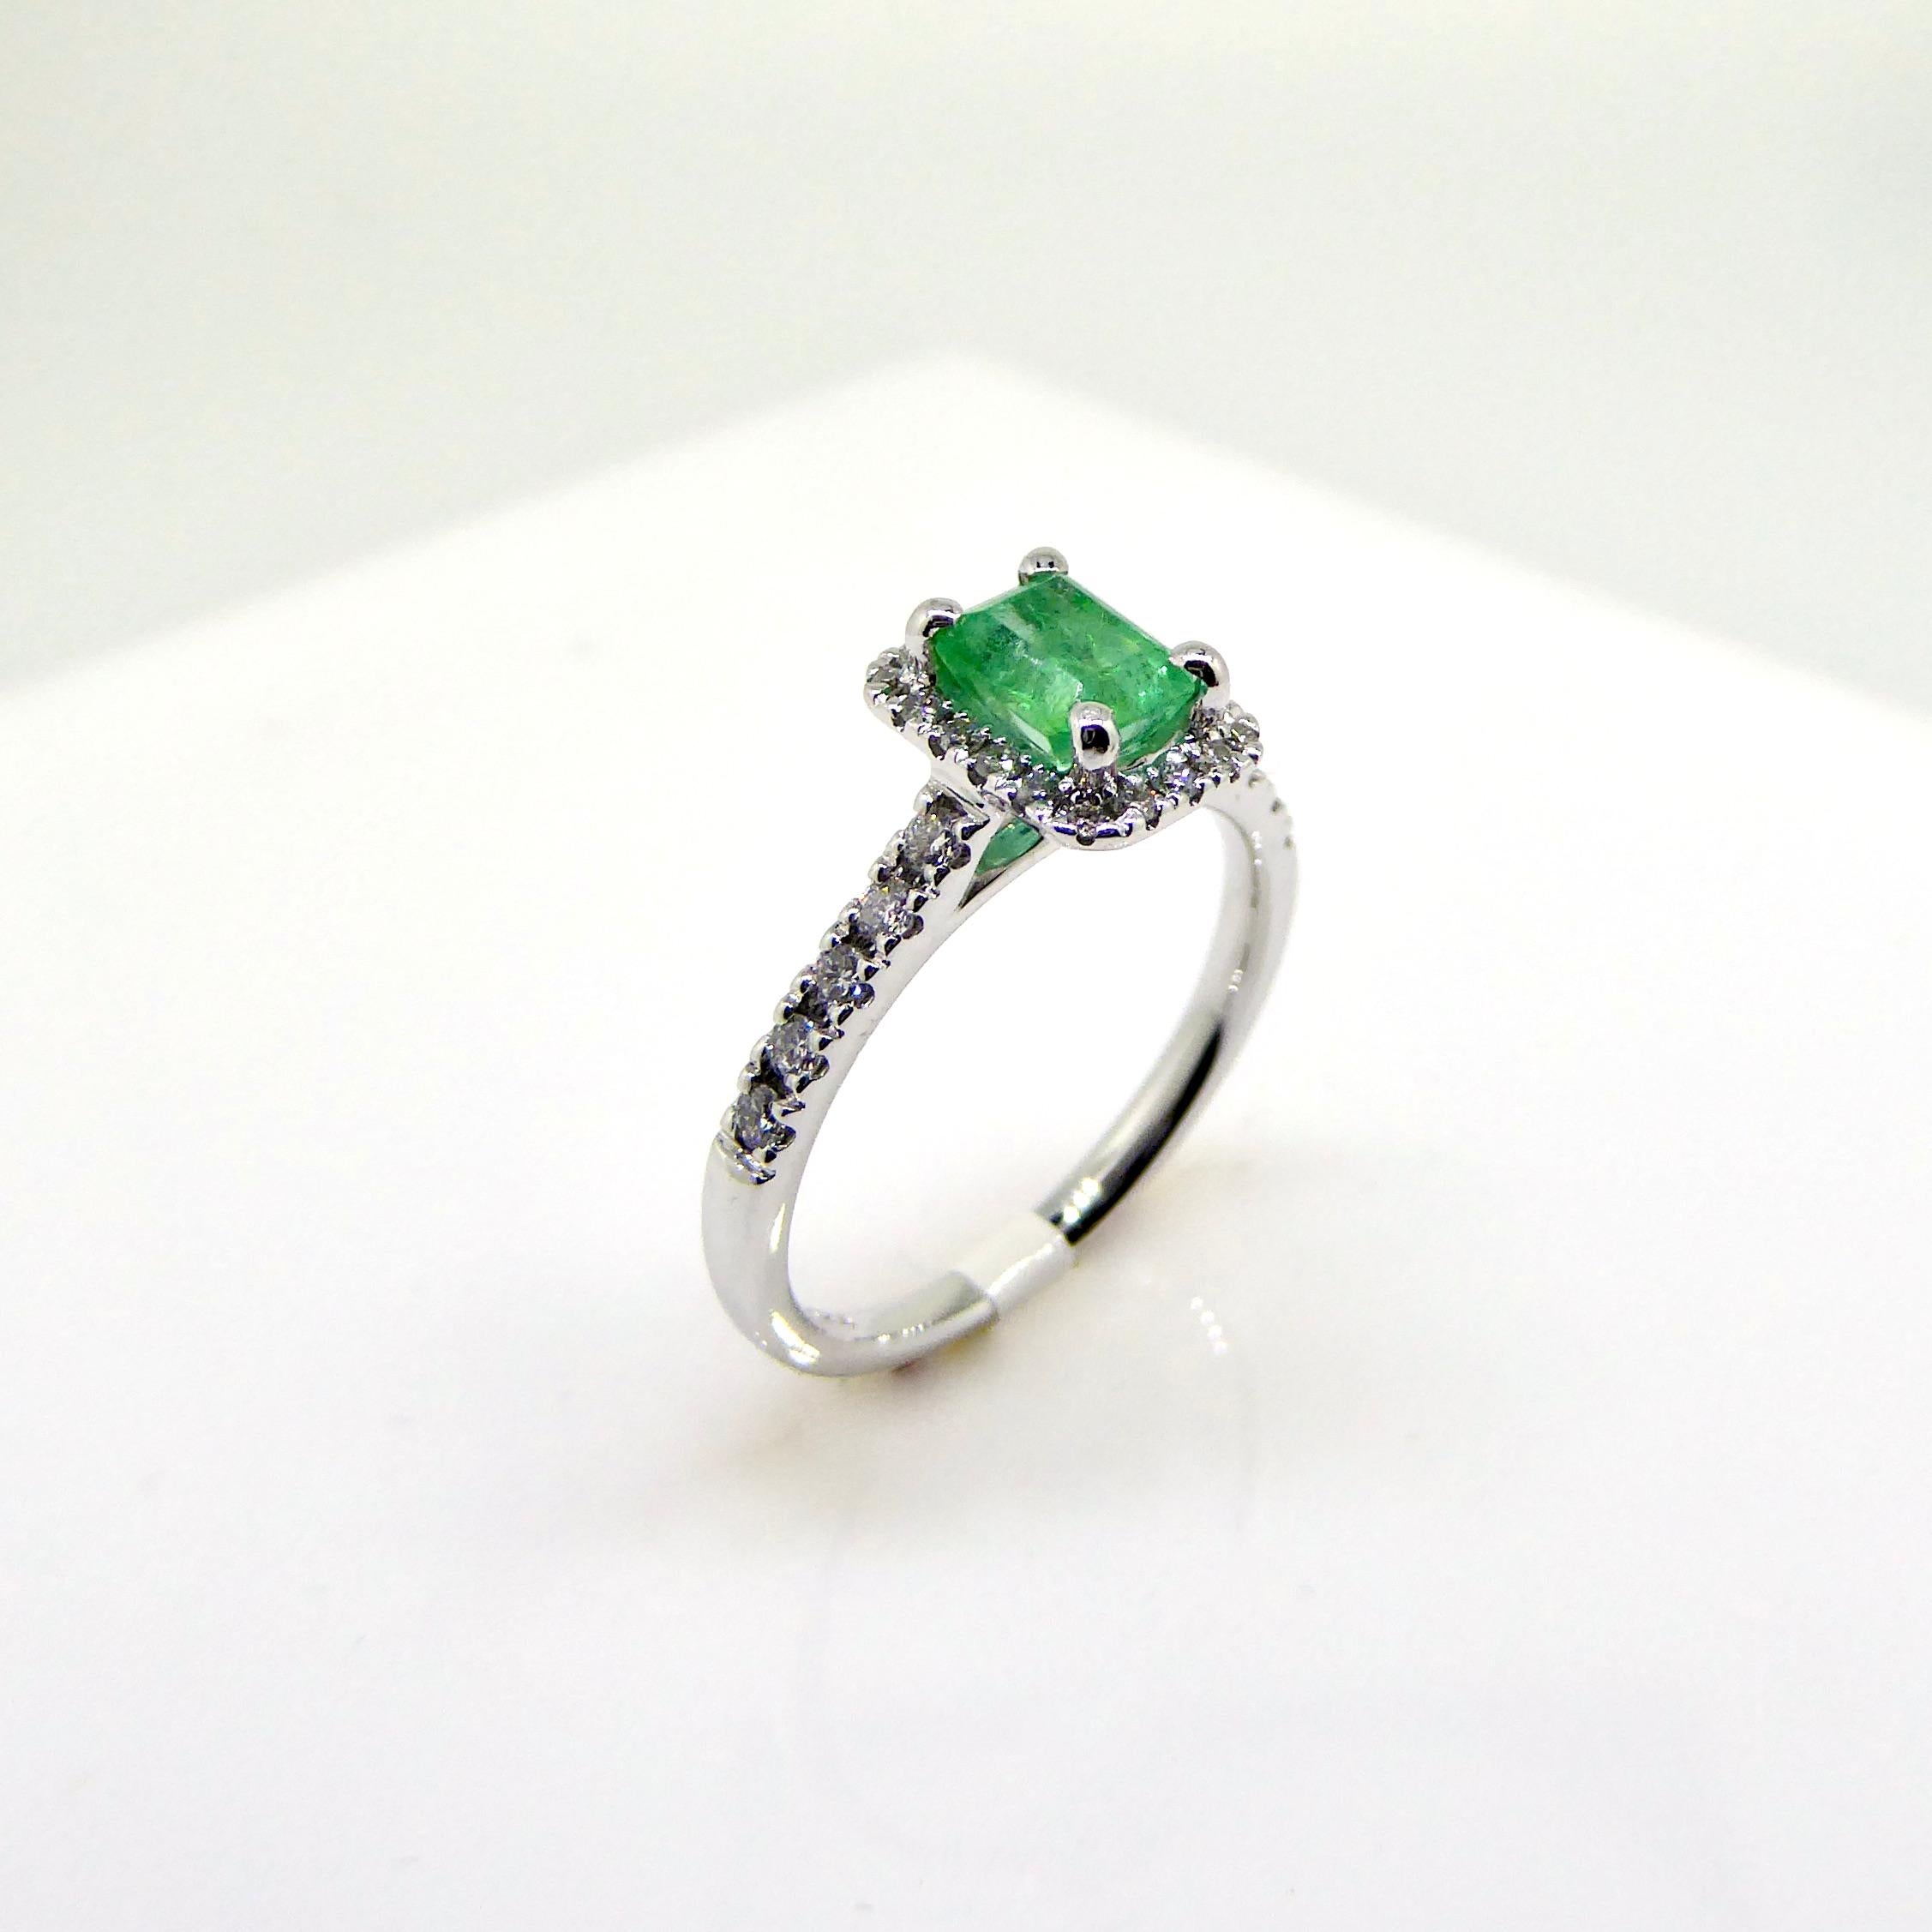 18 carat white gold cluster ring, set with 28 diamonds, brilliant cut, total 0,29 carat. Emerald in emerald cut, Colombia Emerald, 0,70 crt. The Musomine is one of the most famous mines for emeralds in Colombia. A bright fresh geen color. Complete